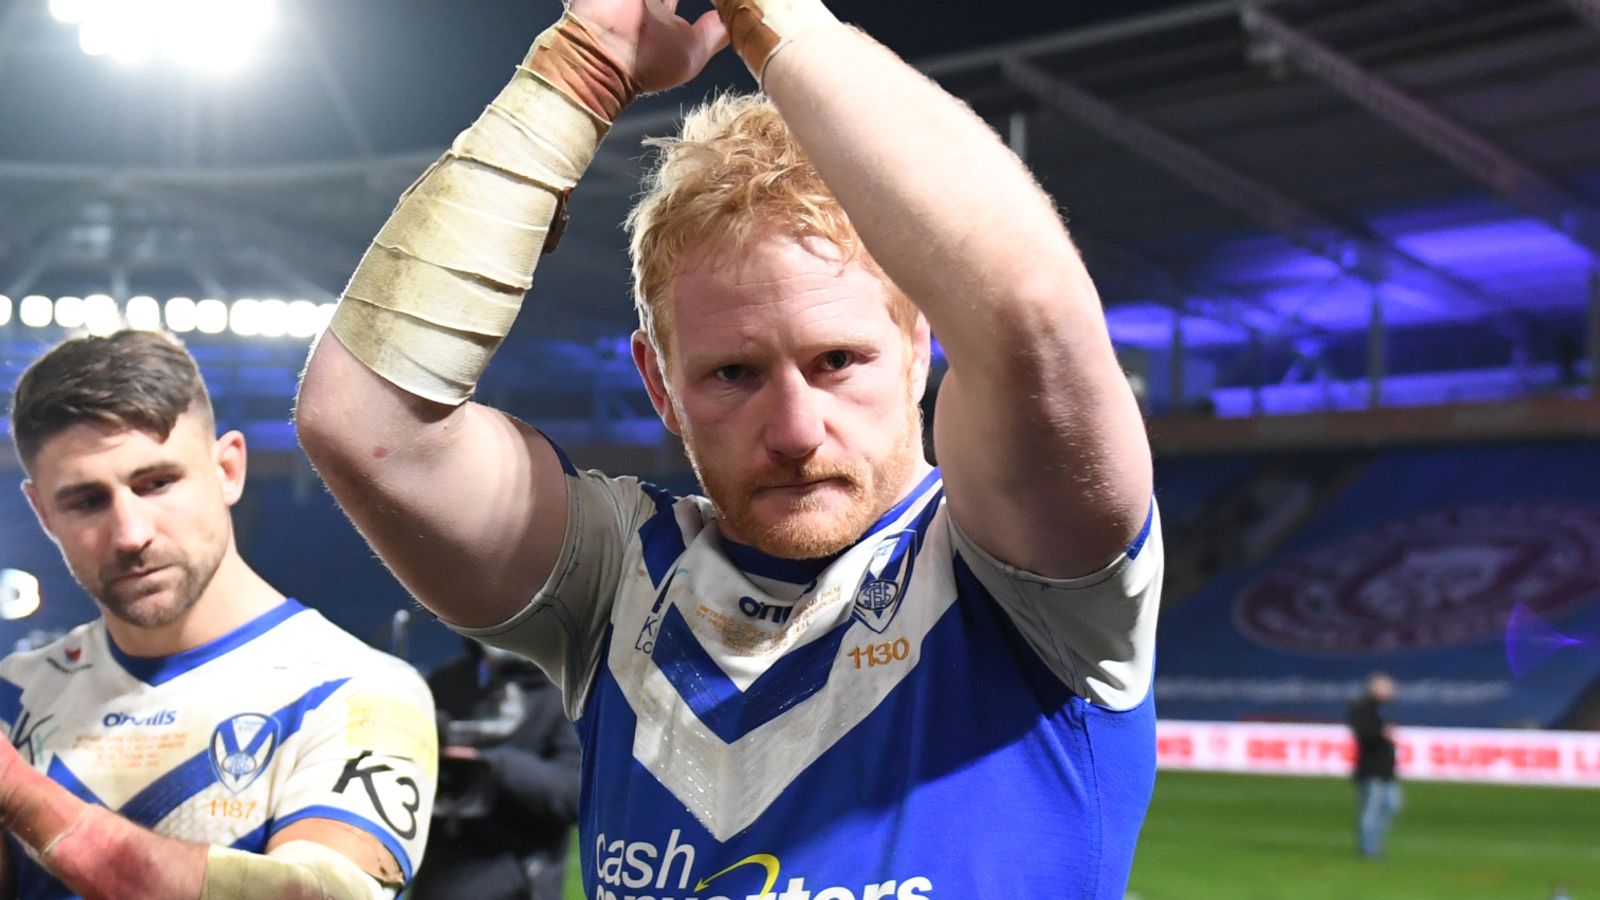 james-graham-former-great-britain-and-england-international-on-advocating-for-concussion-awareness